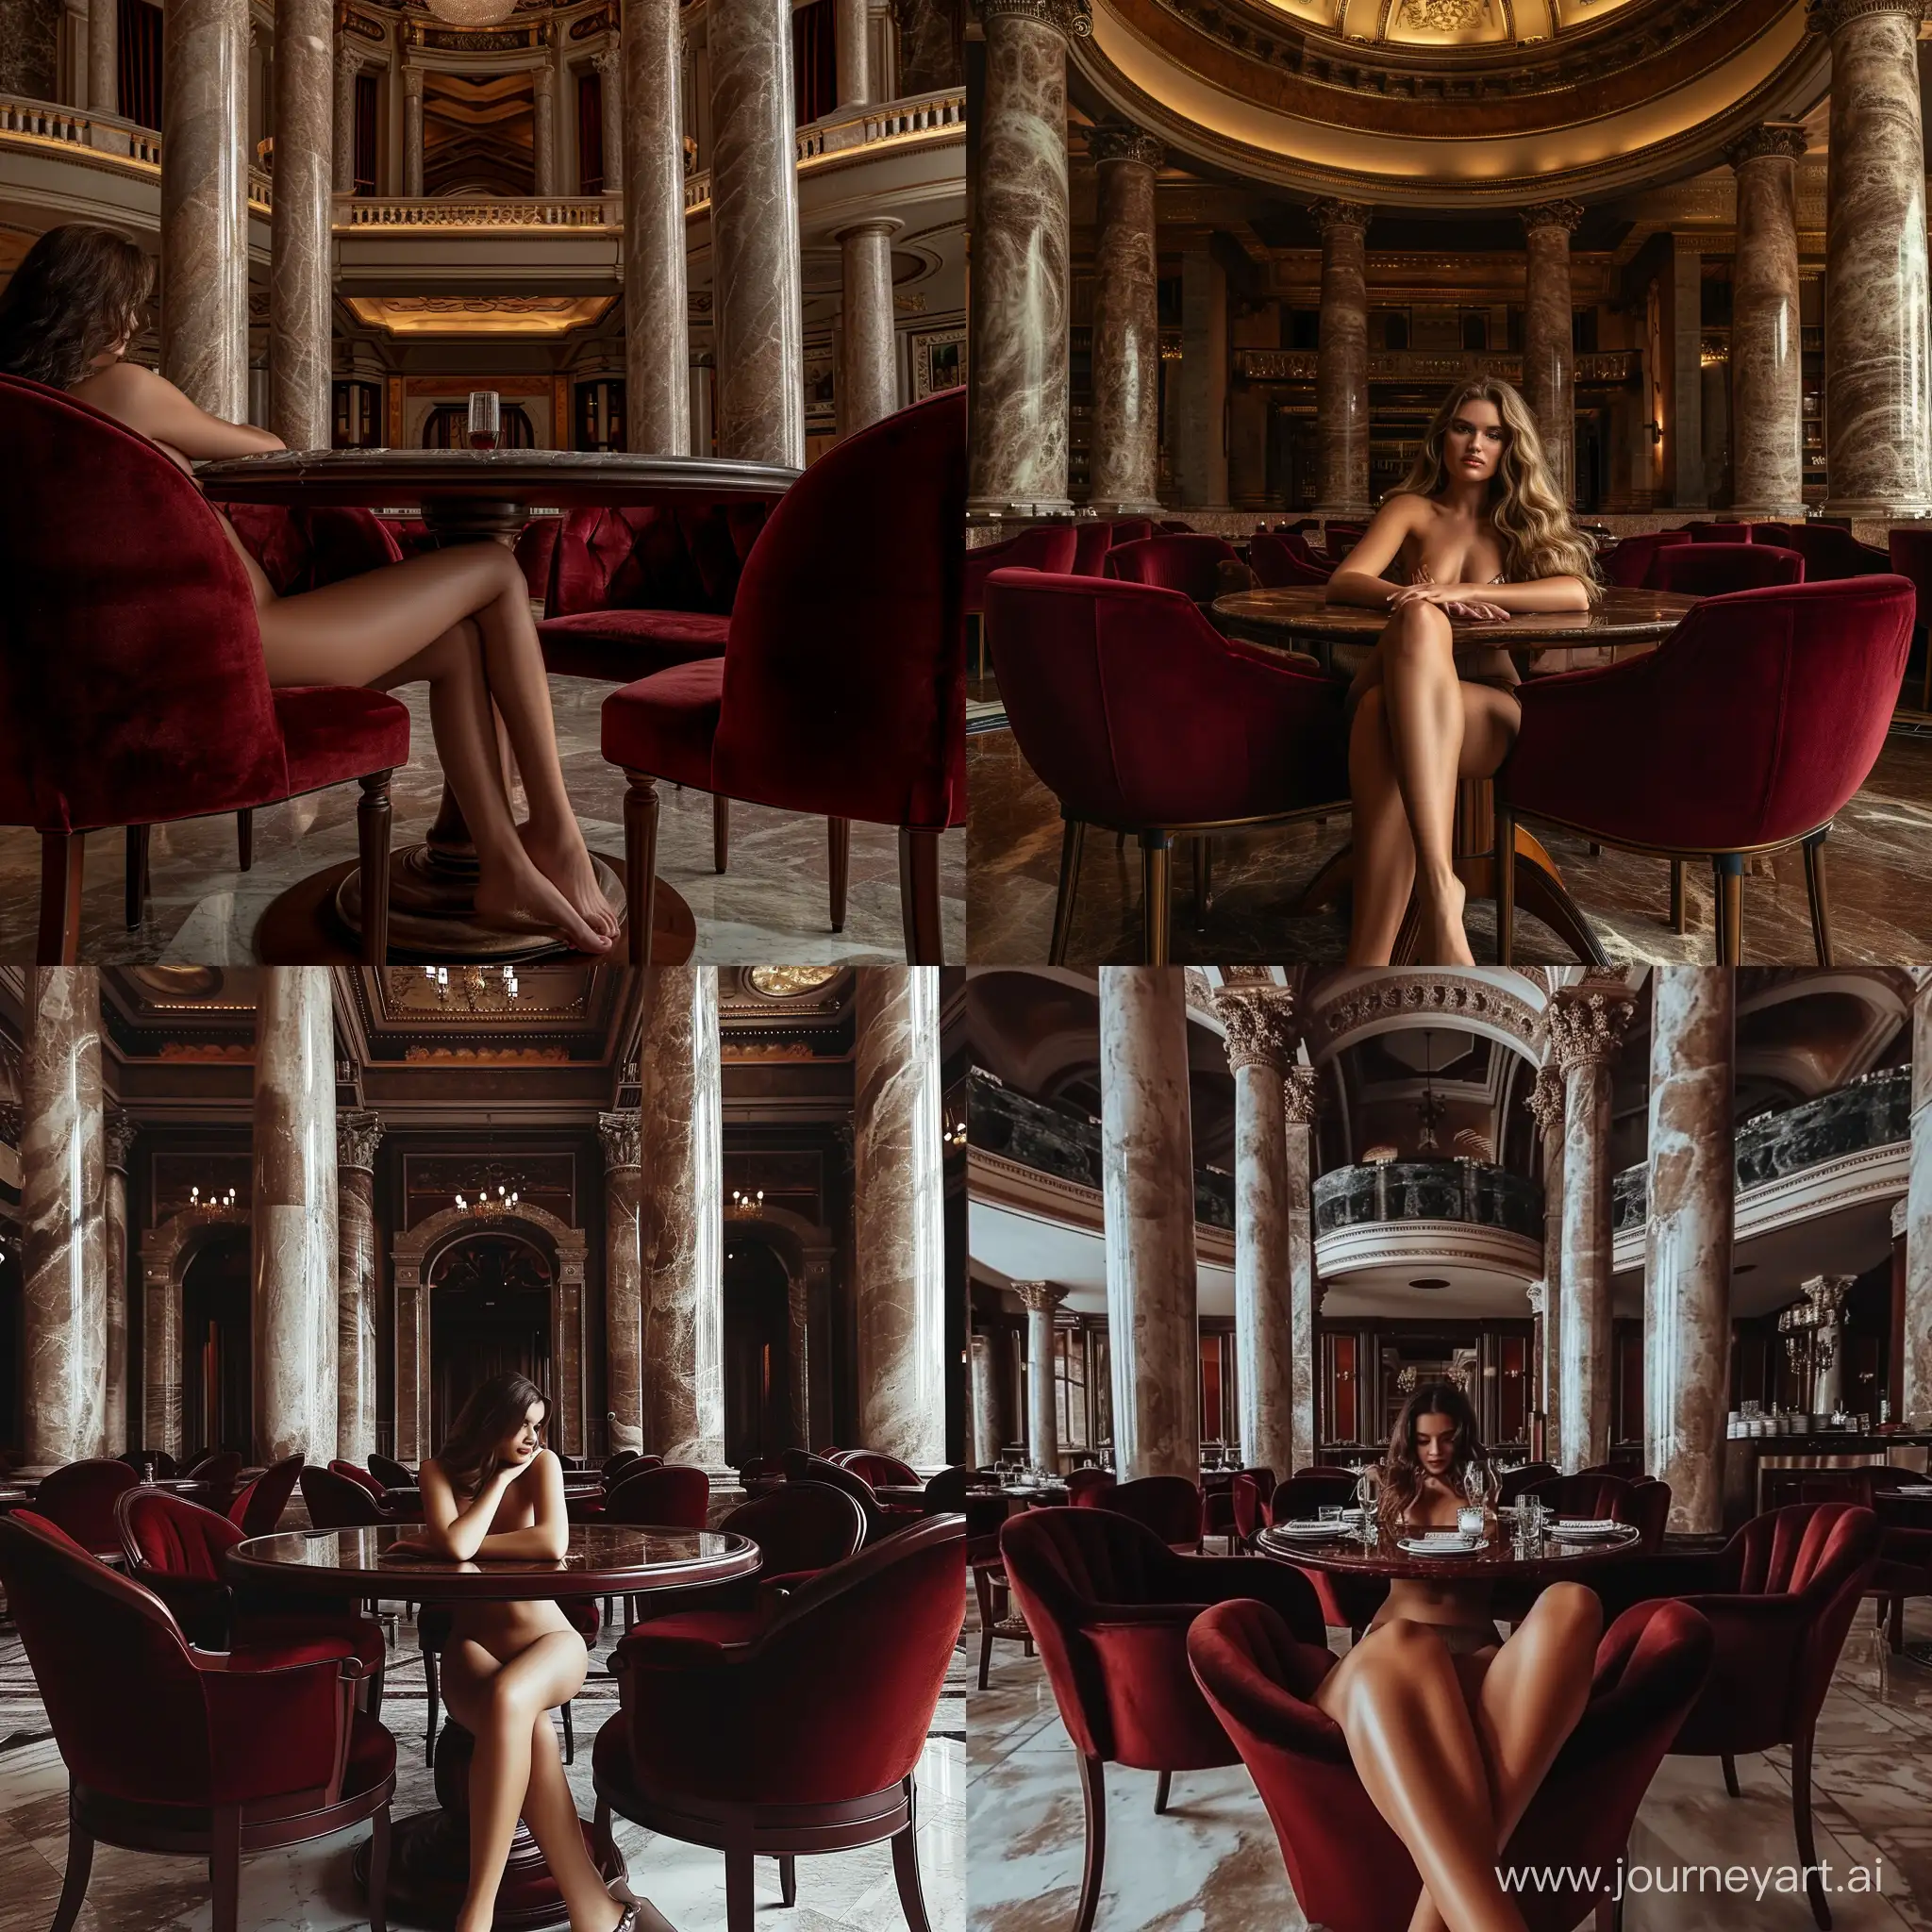 Brunette model with a hour glass physique who doesn’t exist in real life, legs folded under the table sitting in a comfy neo-classical restaurant, deep blood red velvet chairs in a circular shape surrounding a ma mahogany table, double high ceiling, big marble pillars